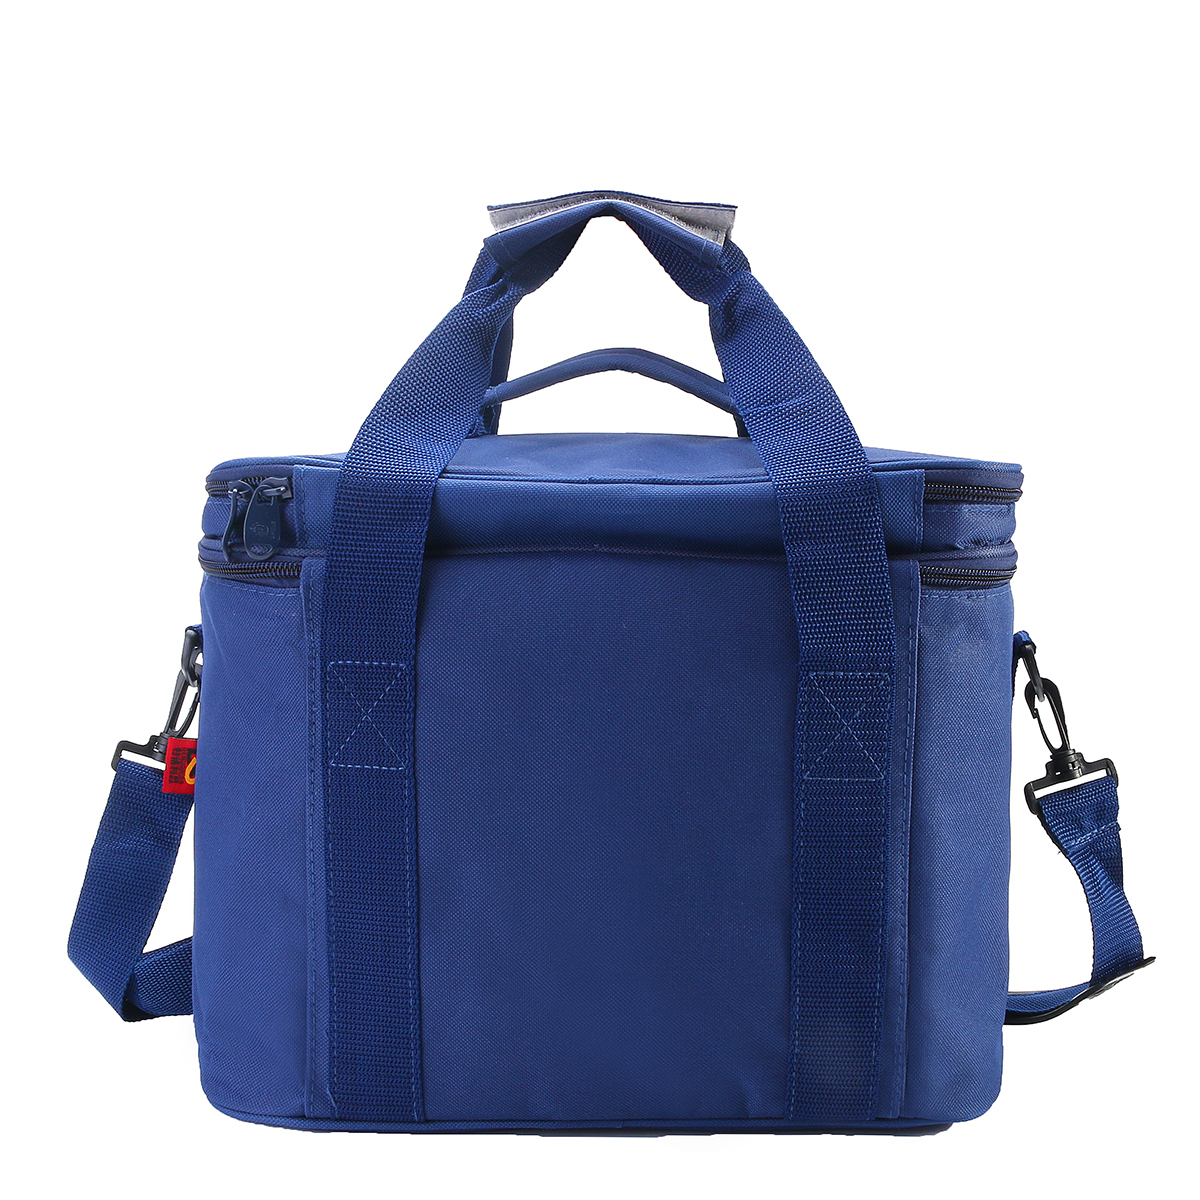 33x20x27cm-Oxford-Double-layer-Insulated-Lunch-Bag-Large-Capacity-Travel-Outdoor-Picnic-Tote-Bag-1199100-4